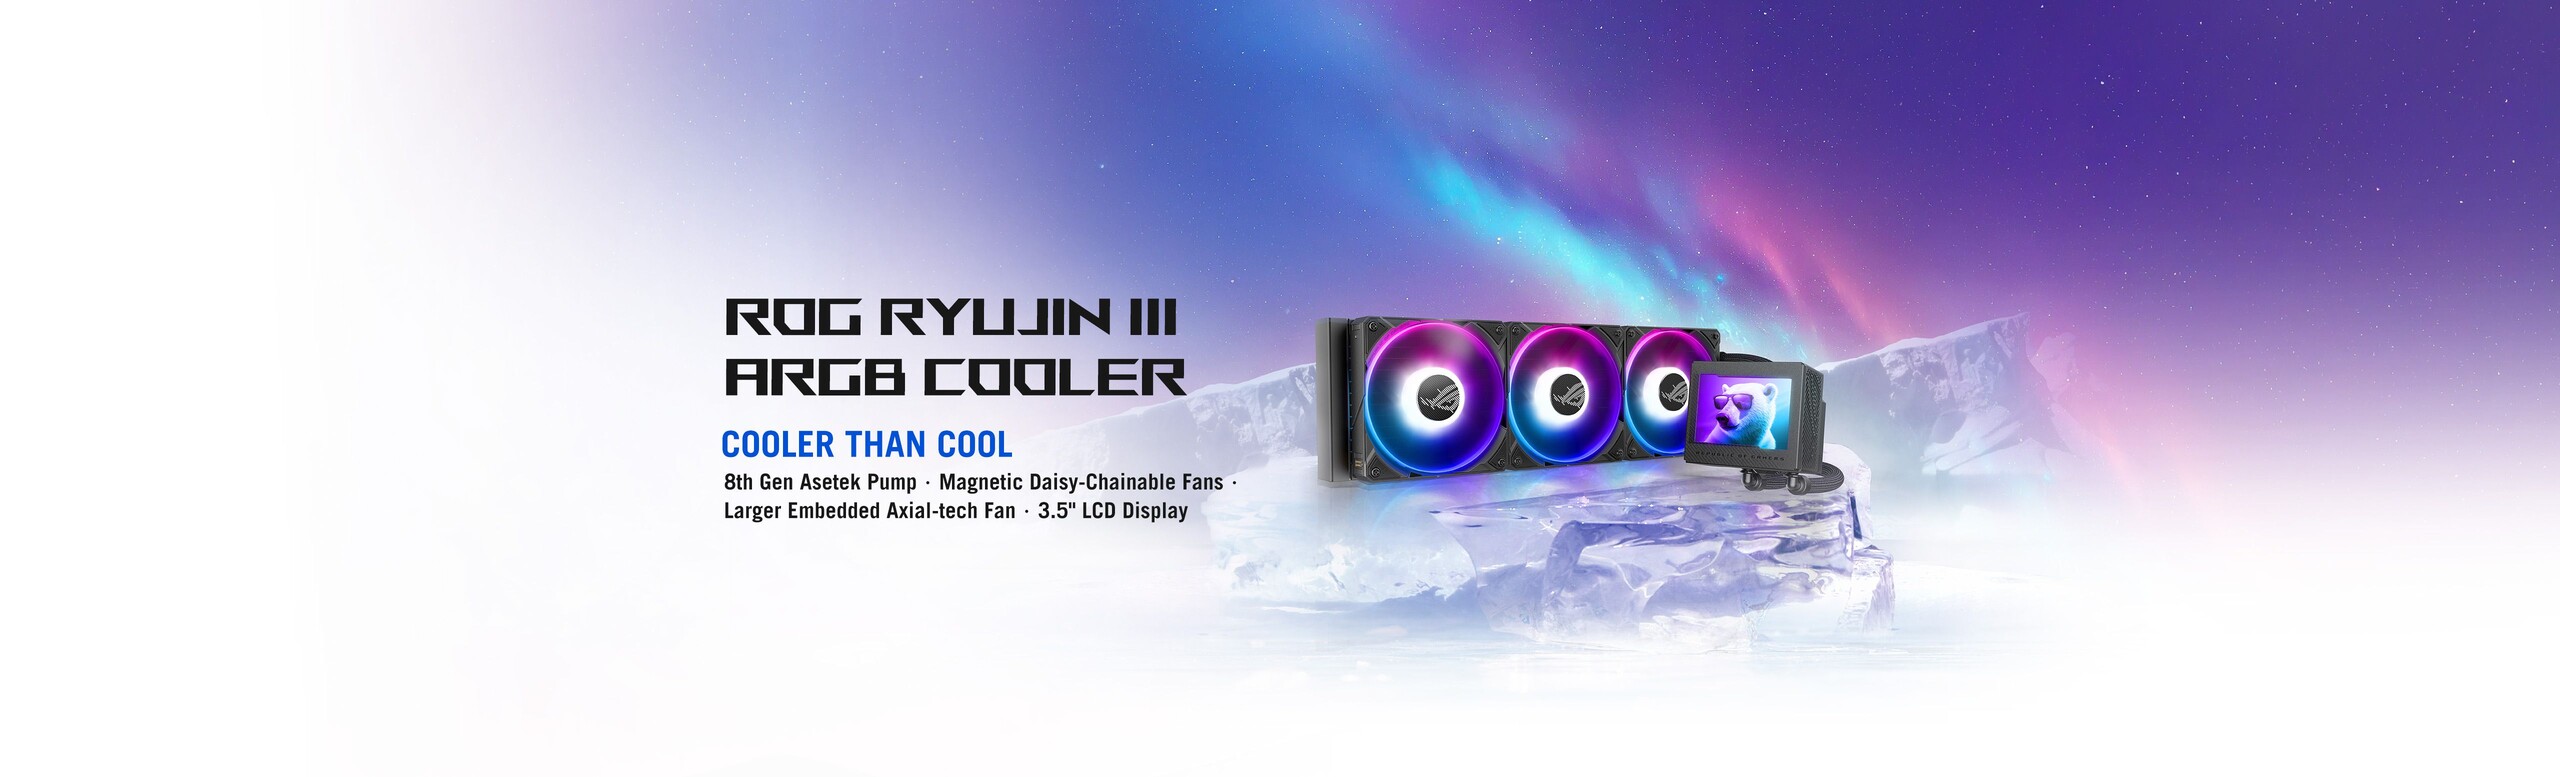 ROG RYUJIN III ARGB COOLER COOLER THAN COOL 8th Gen Asetek Pump Magnetic Daisy-Chainable Fans Larger Embedded Axial-tech Fan 3.5" LCD Display